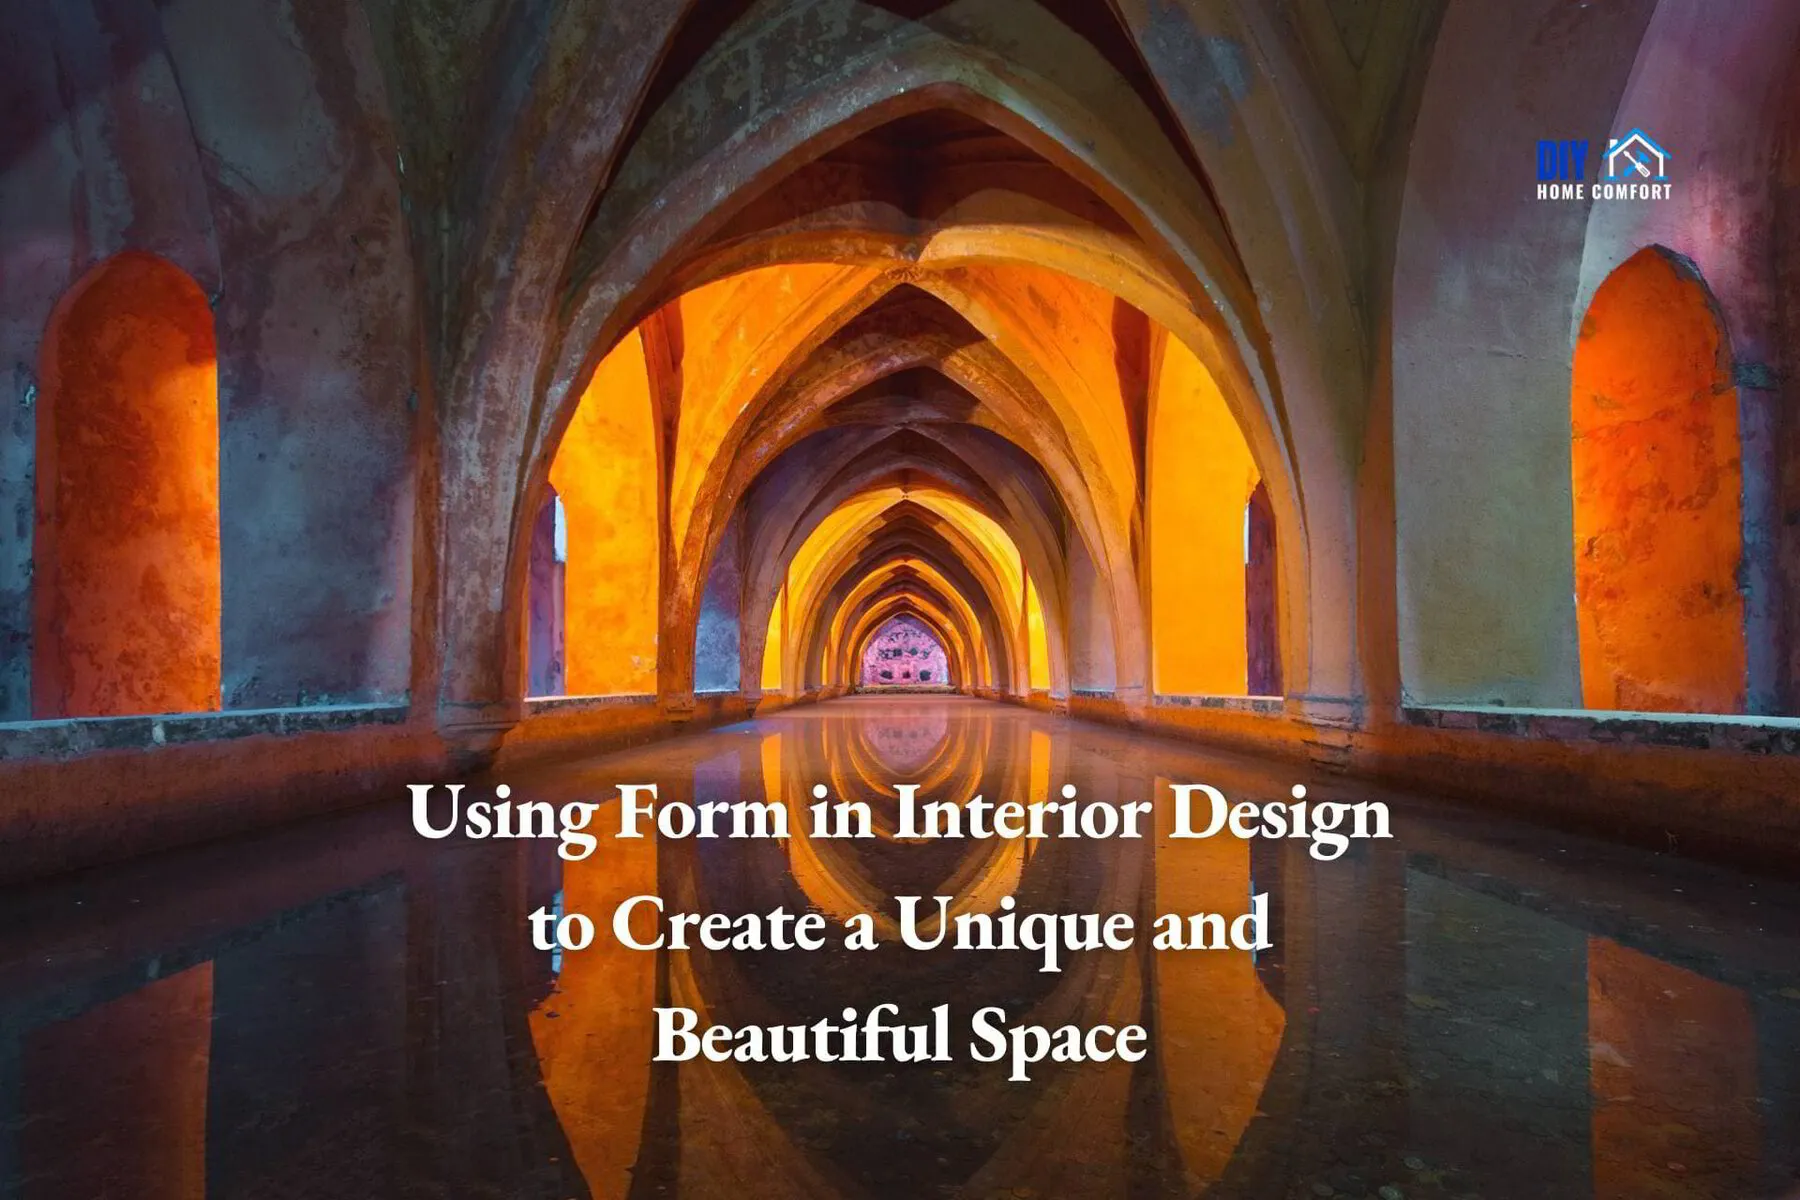 Using Form in Interior Design to Create a Unique and Beautiful Space | DIY Home Comfort